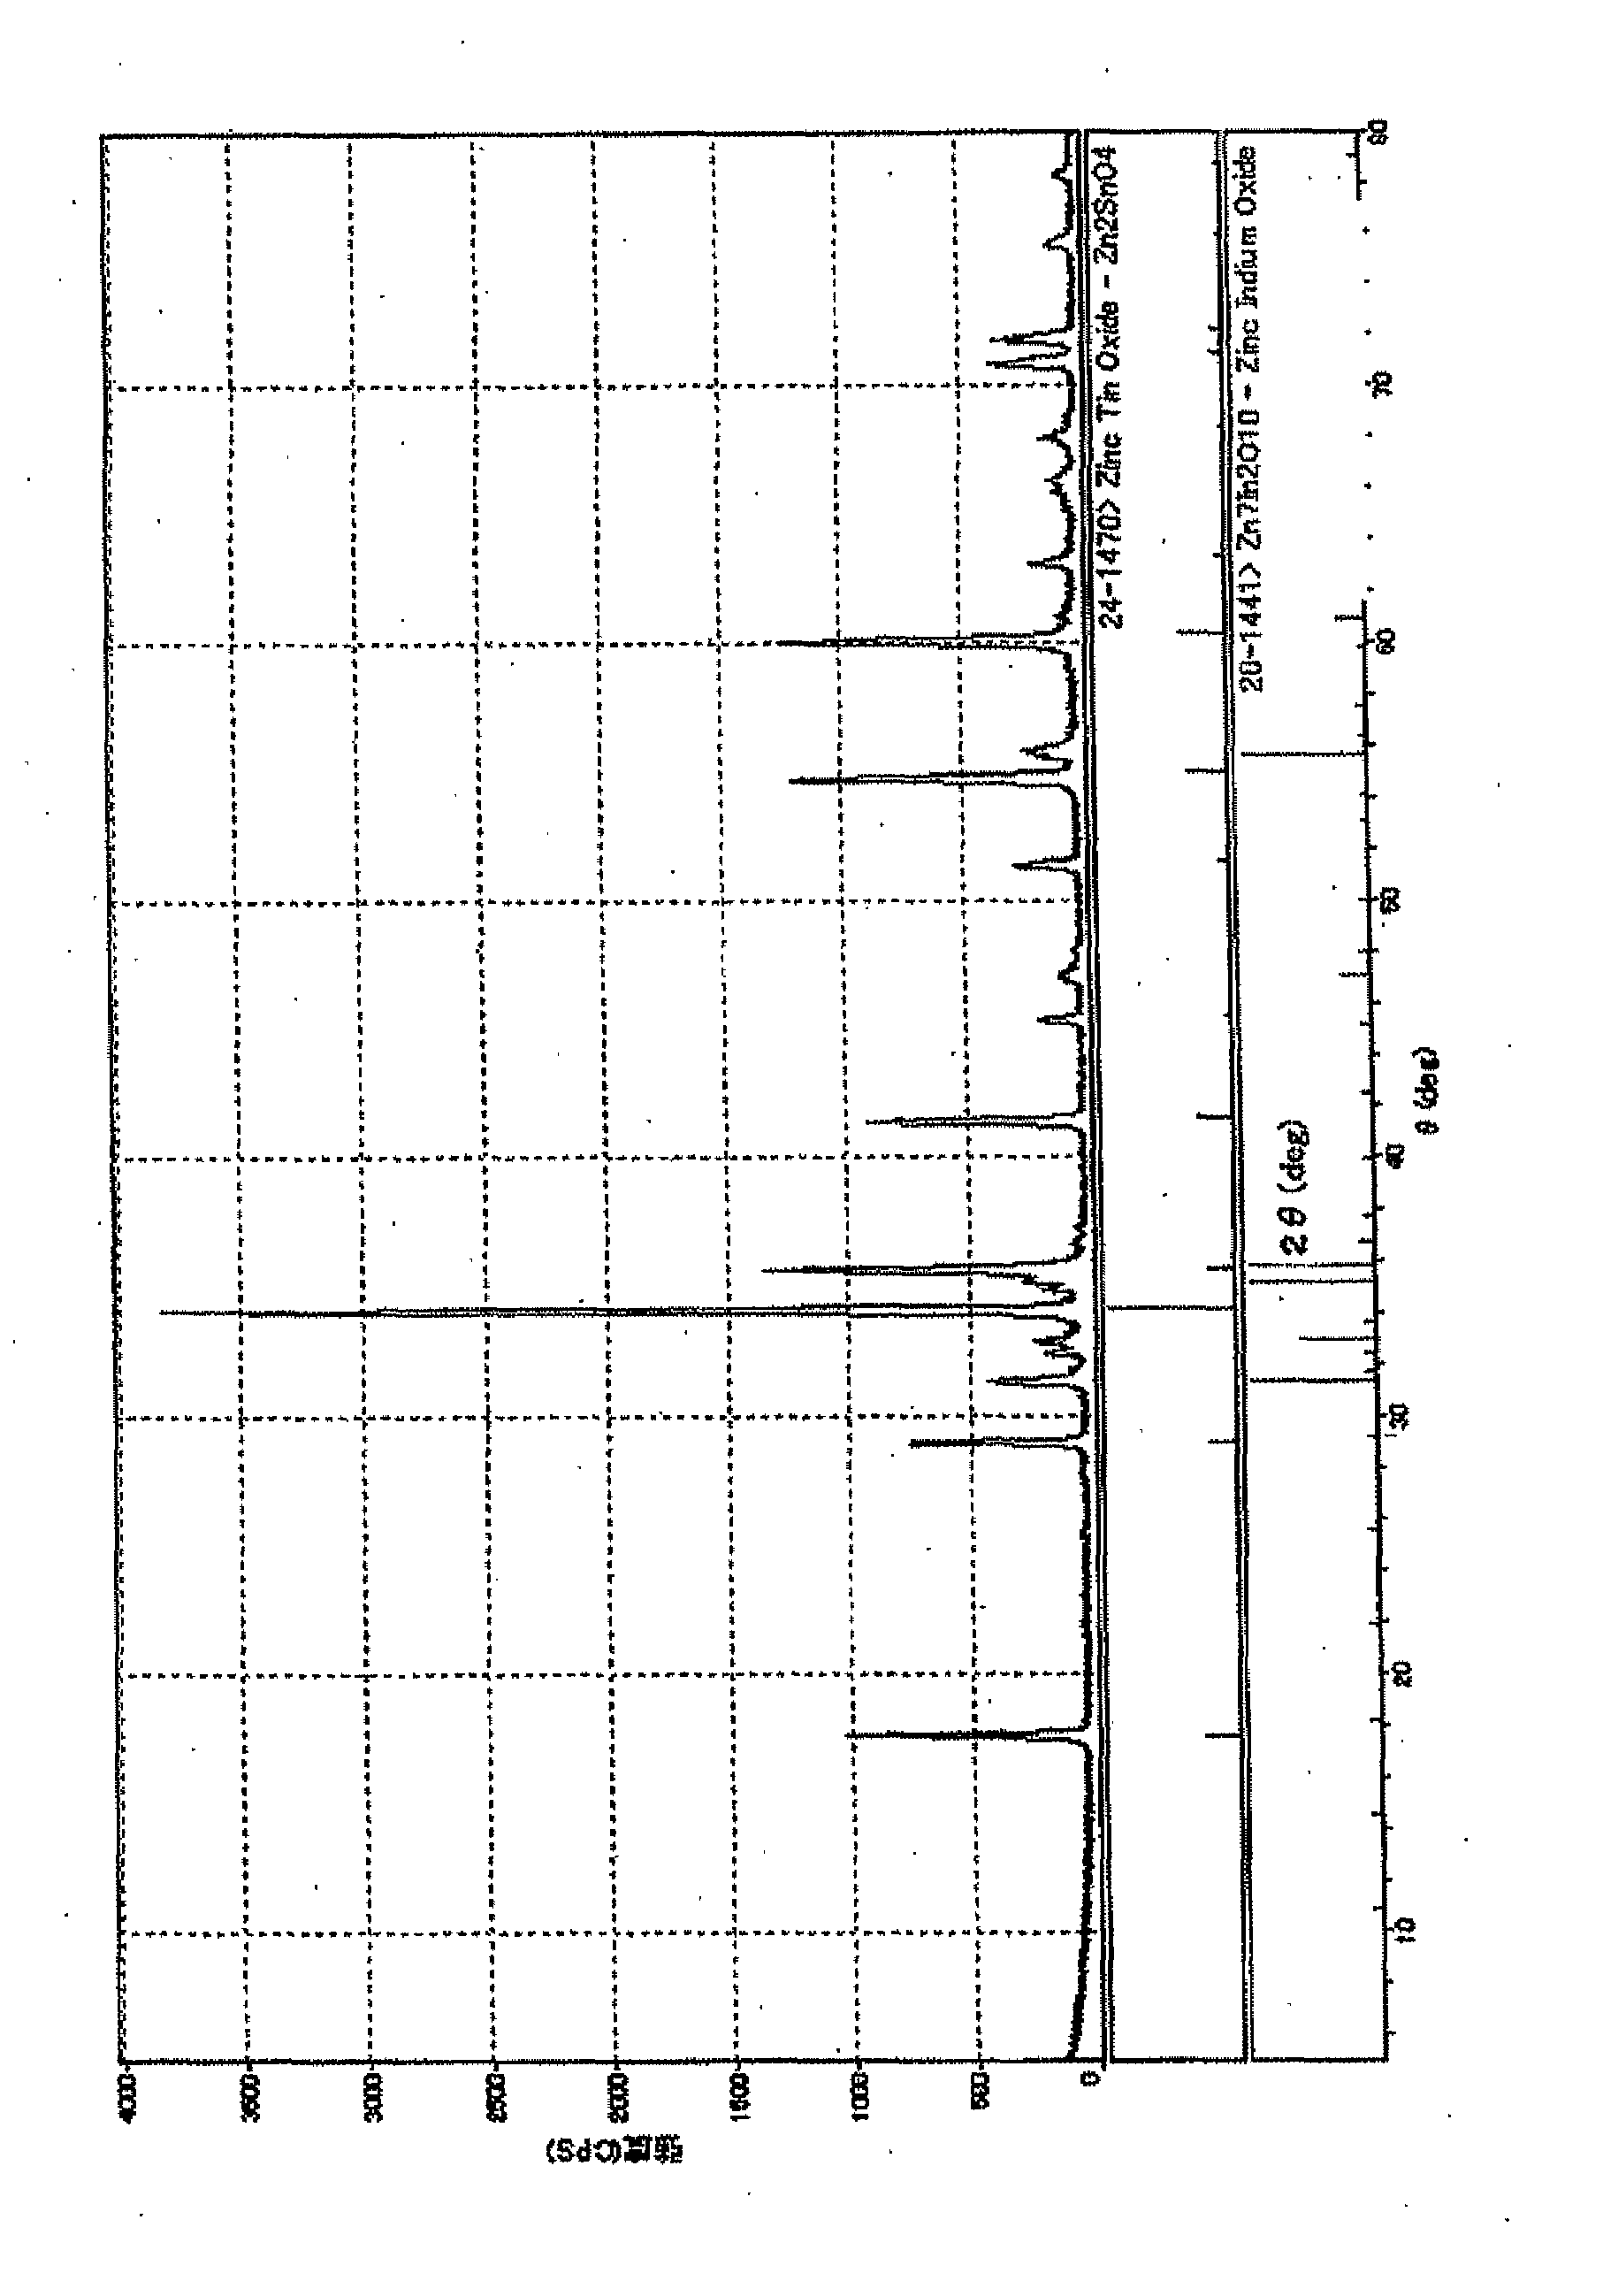 Sputtering target, transparent conductive film, and transparent electrode for touch panel